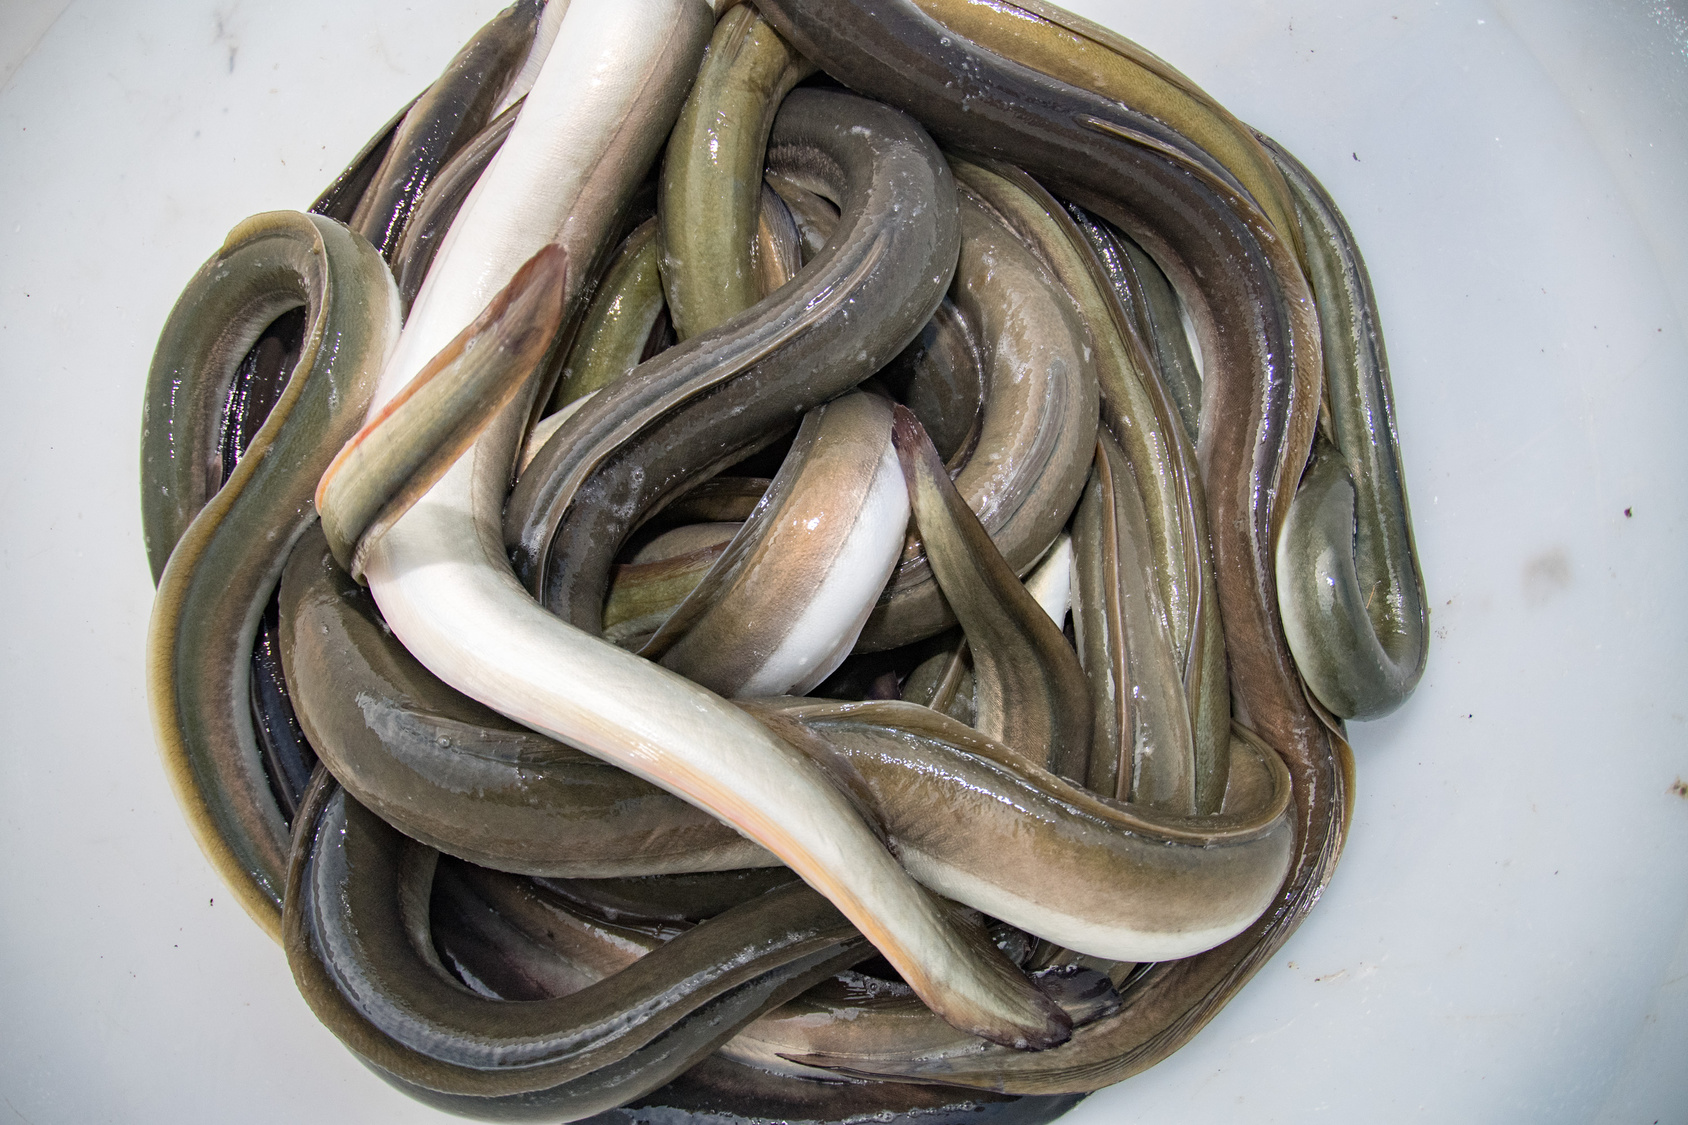 The traditional eel festival is takin place in Comacchio. Eel are fished in old way in the valley and ready to sell.